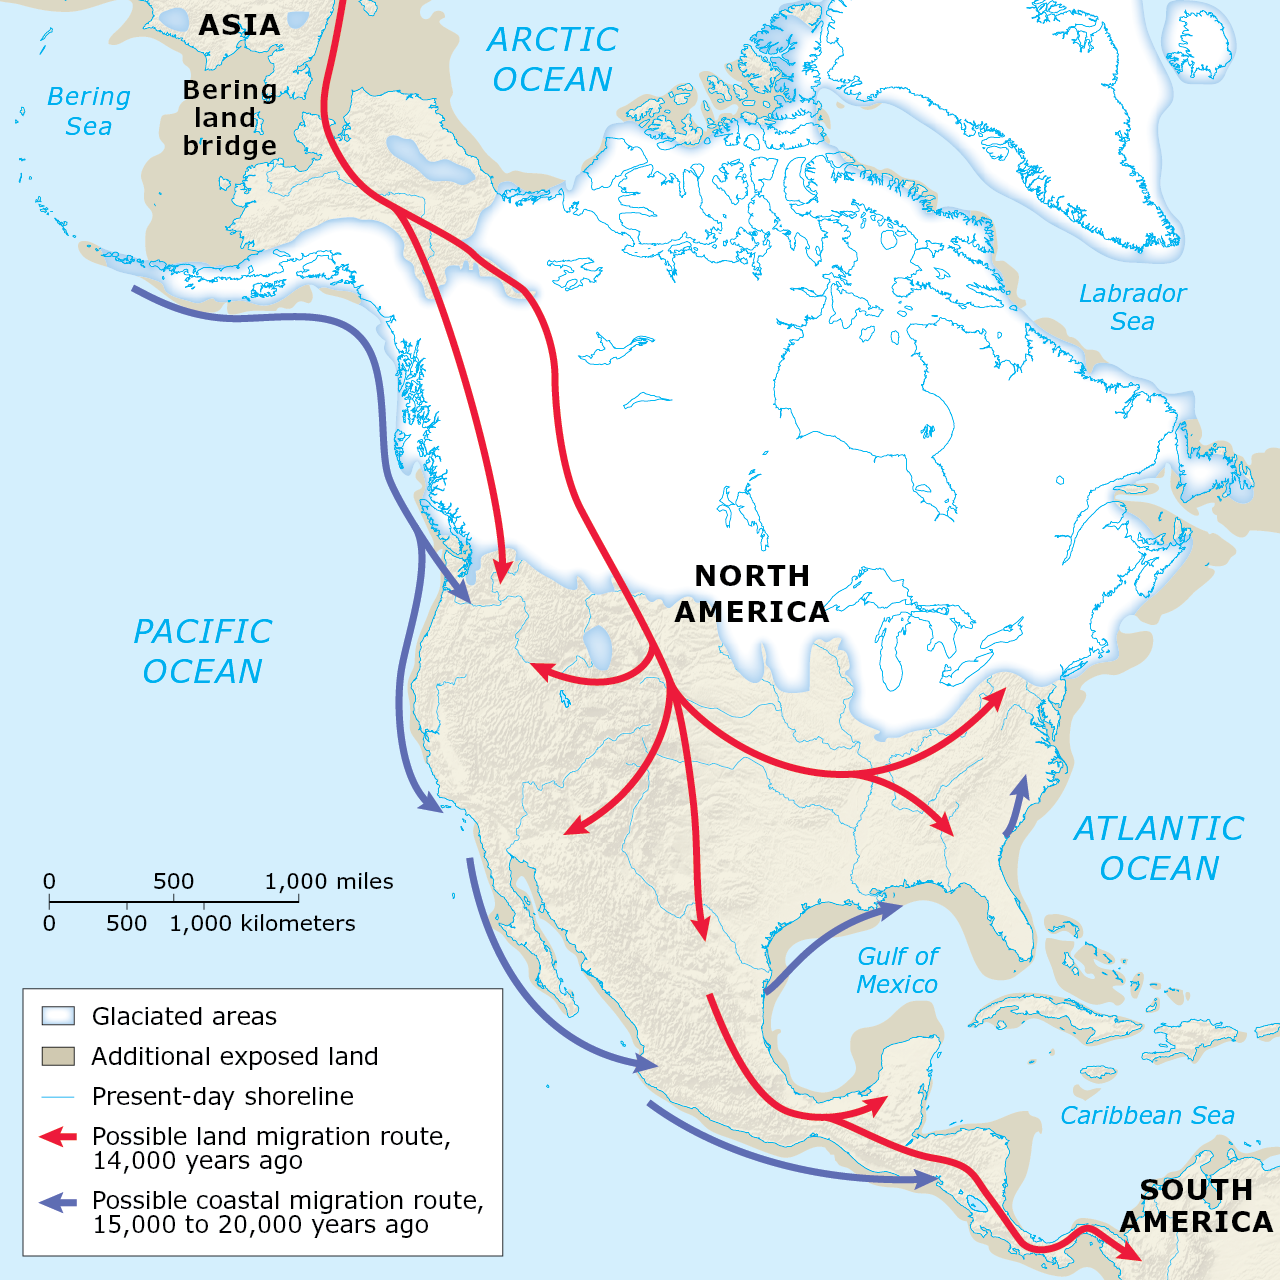 Map 1.1, “Migration Routes into the Americas,” is a map of North America using arrows to show possible migration routes thousands of years ago.